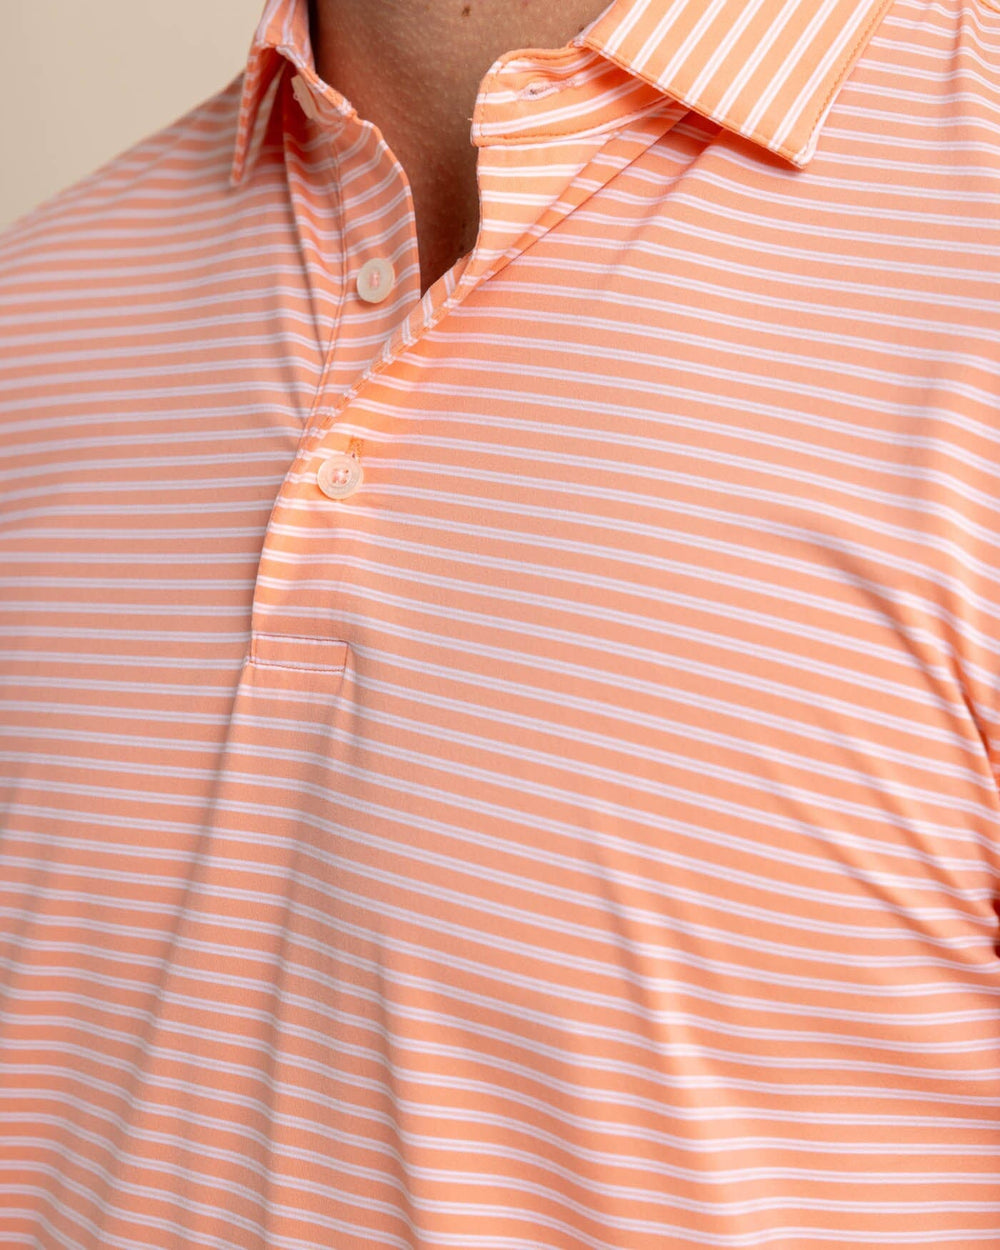 The detail view of the Southern Tide brrr eeze Beattie Stripe Performance Polo by Southern Tide - Desert Flower Coral